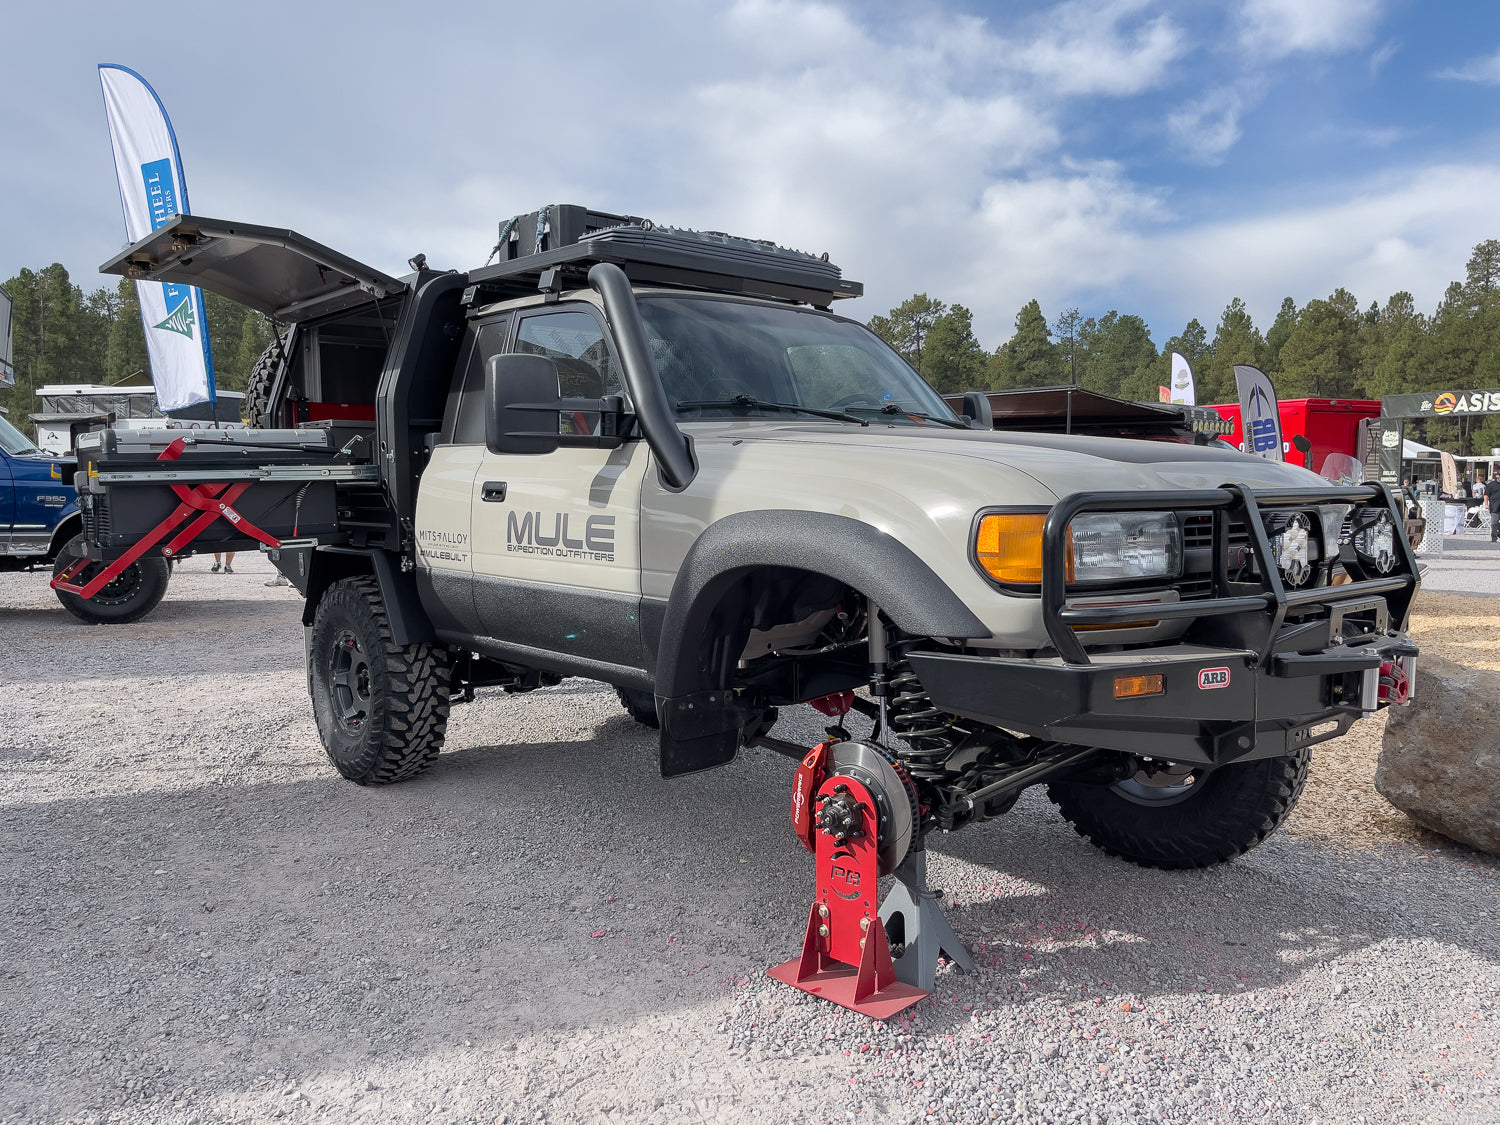 Project #MuleWagon Revealed at Overland Expo West